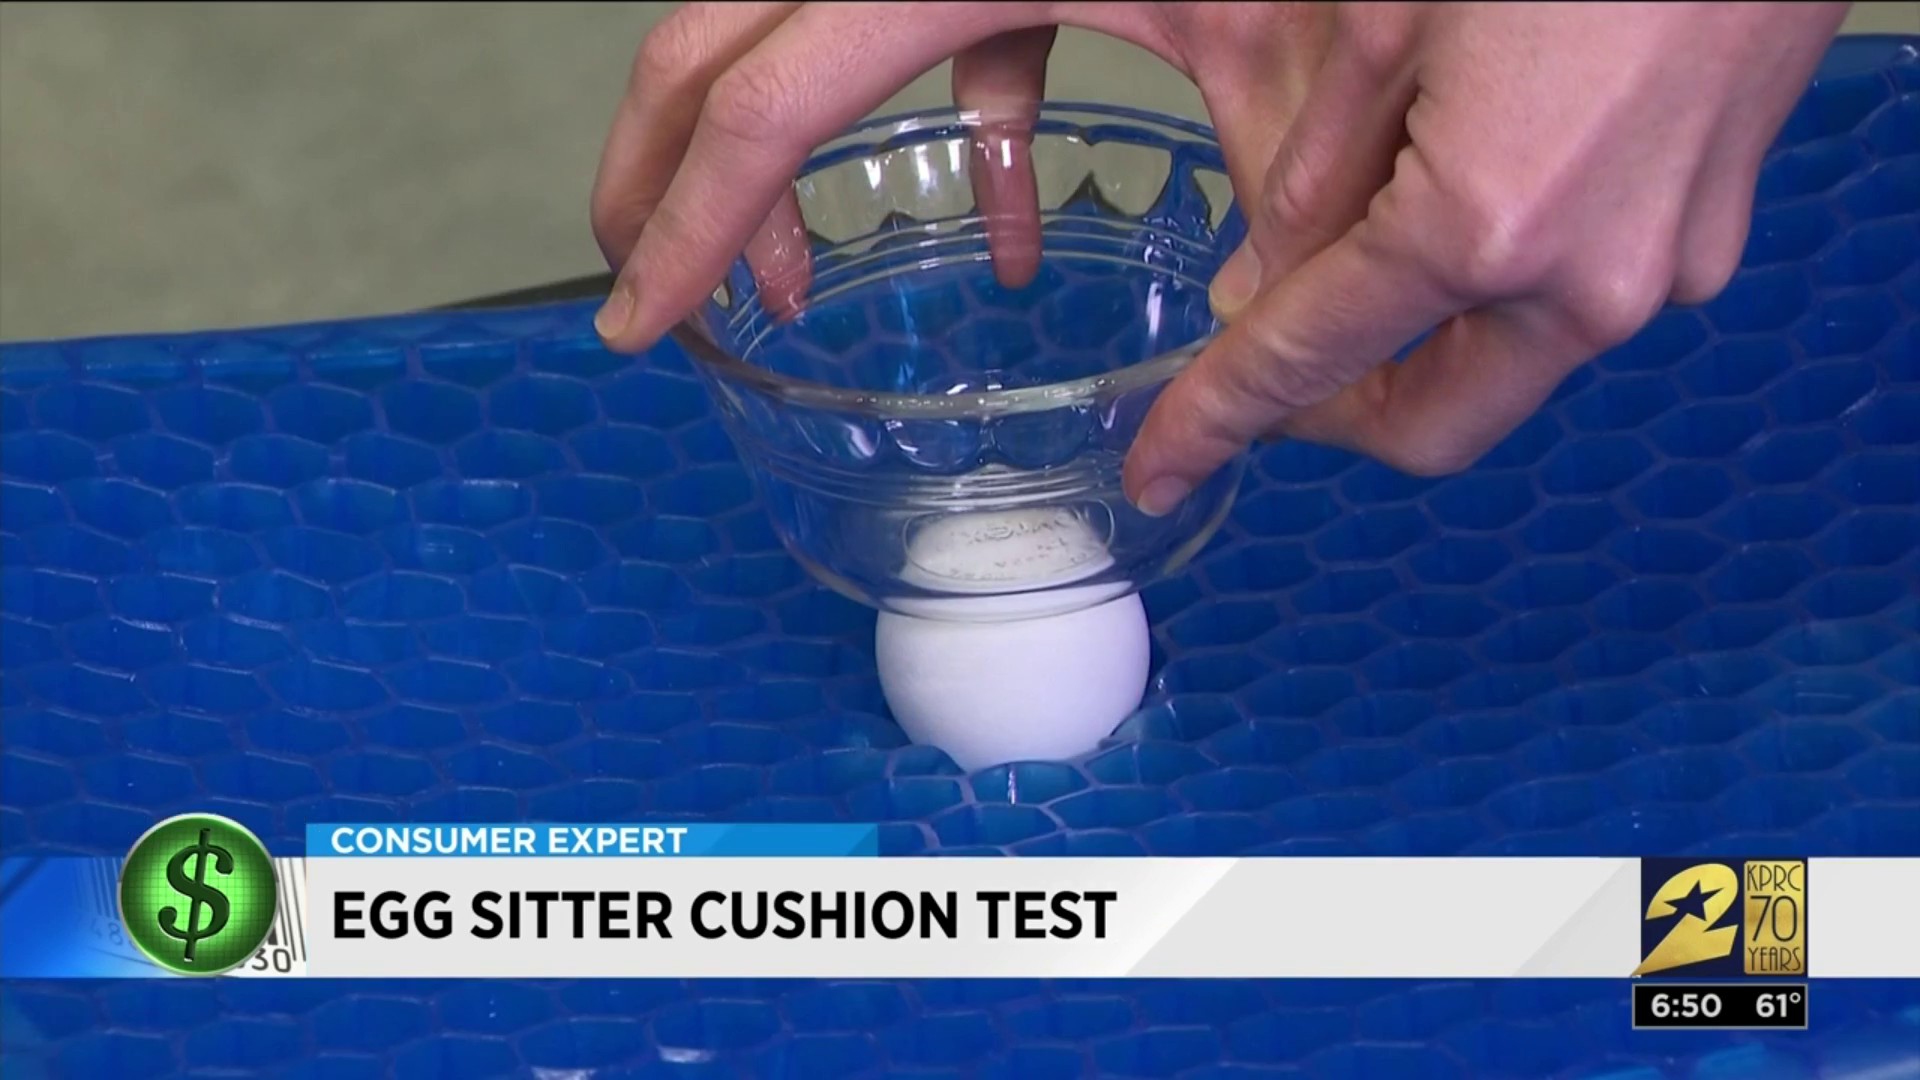 This case has been cracked: Is the Egg Sitter Cushion a good